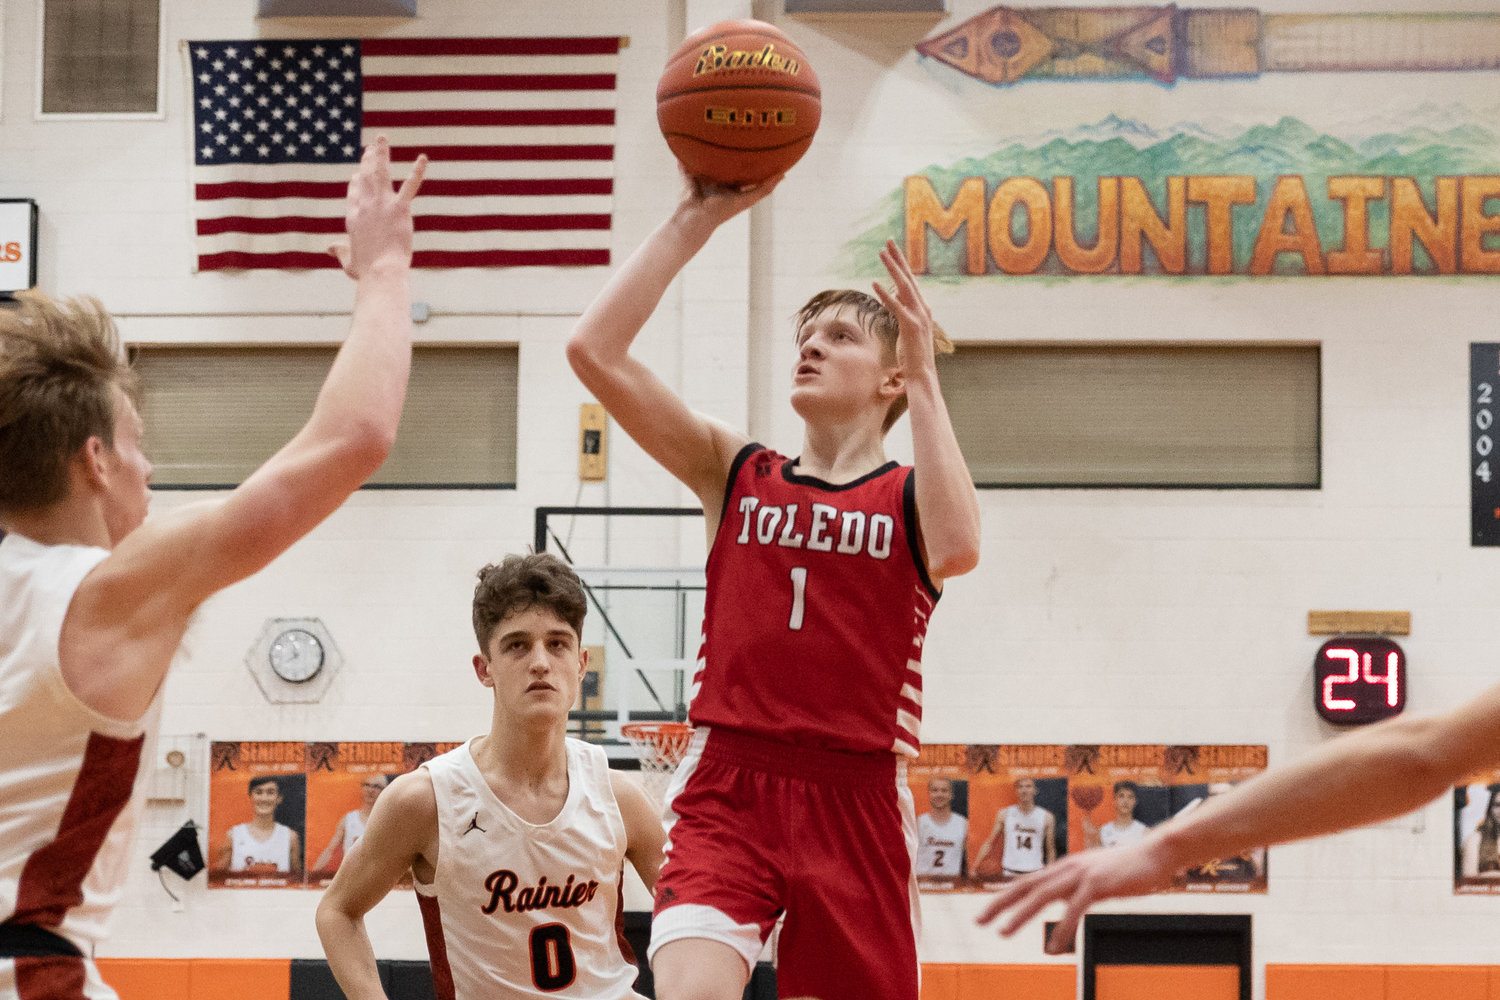 Toledo guard Jake Cournyer takes a floater against Rainier Jan. 19.